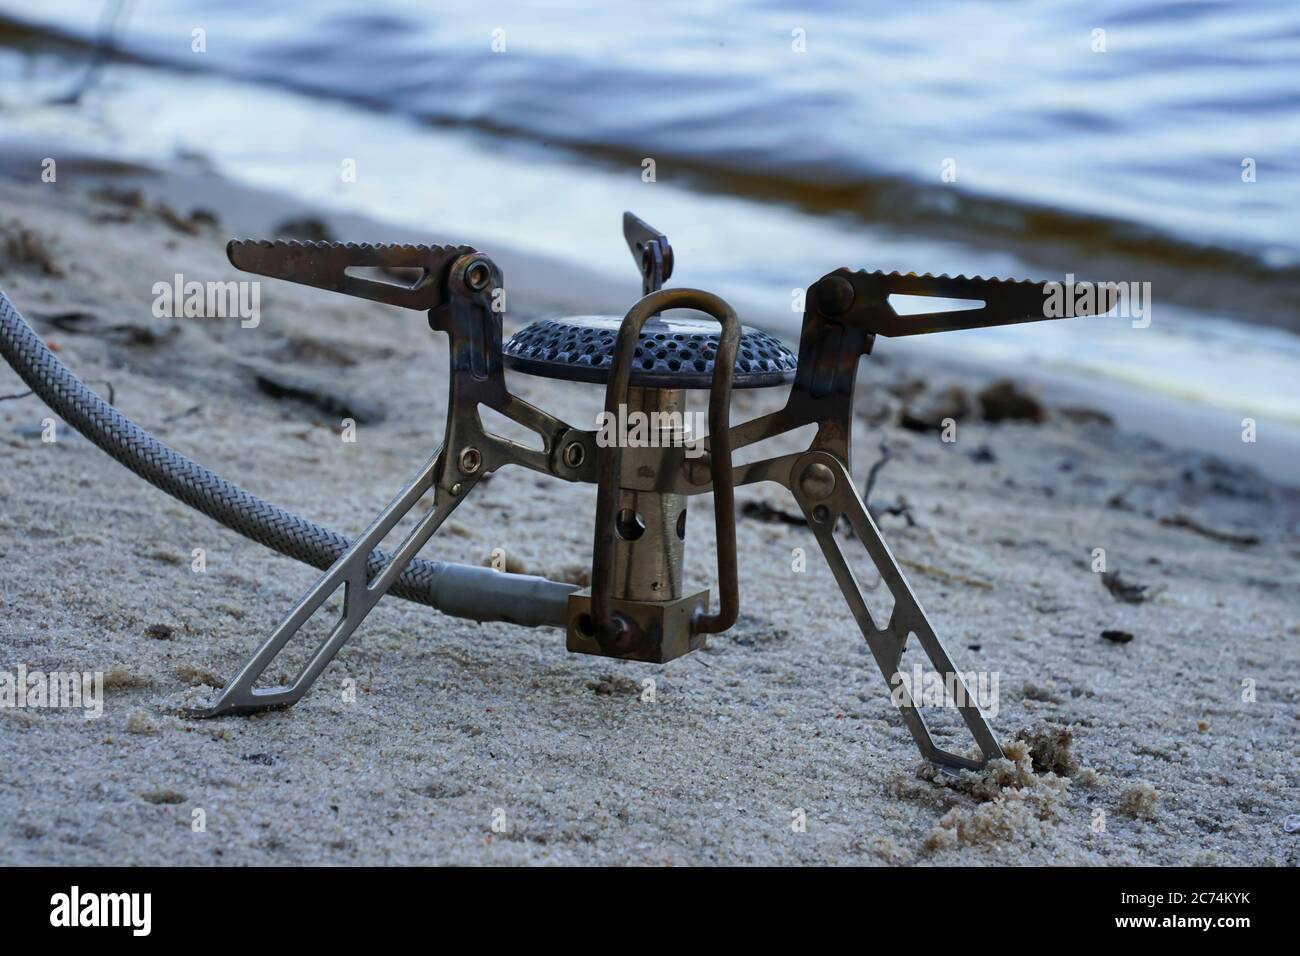 tourist gas burner stands on the sand Stock Photo